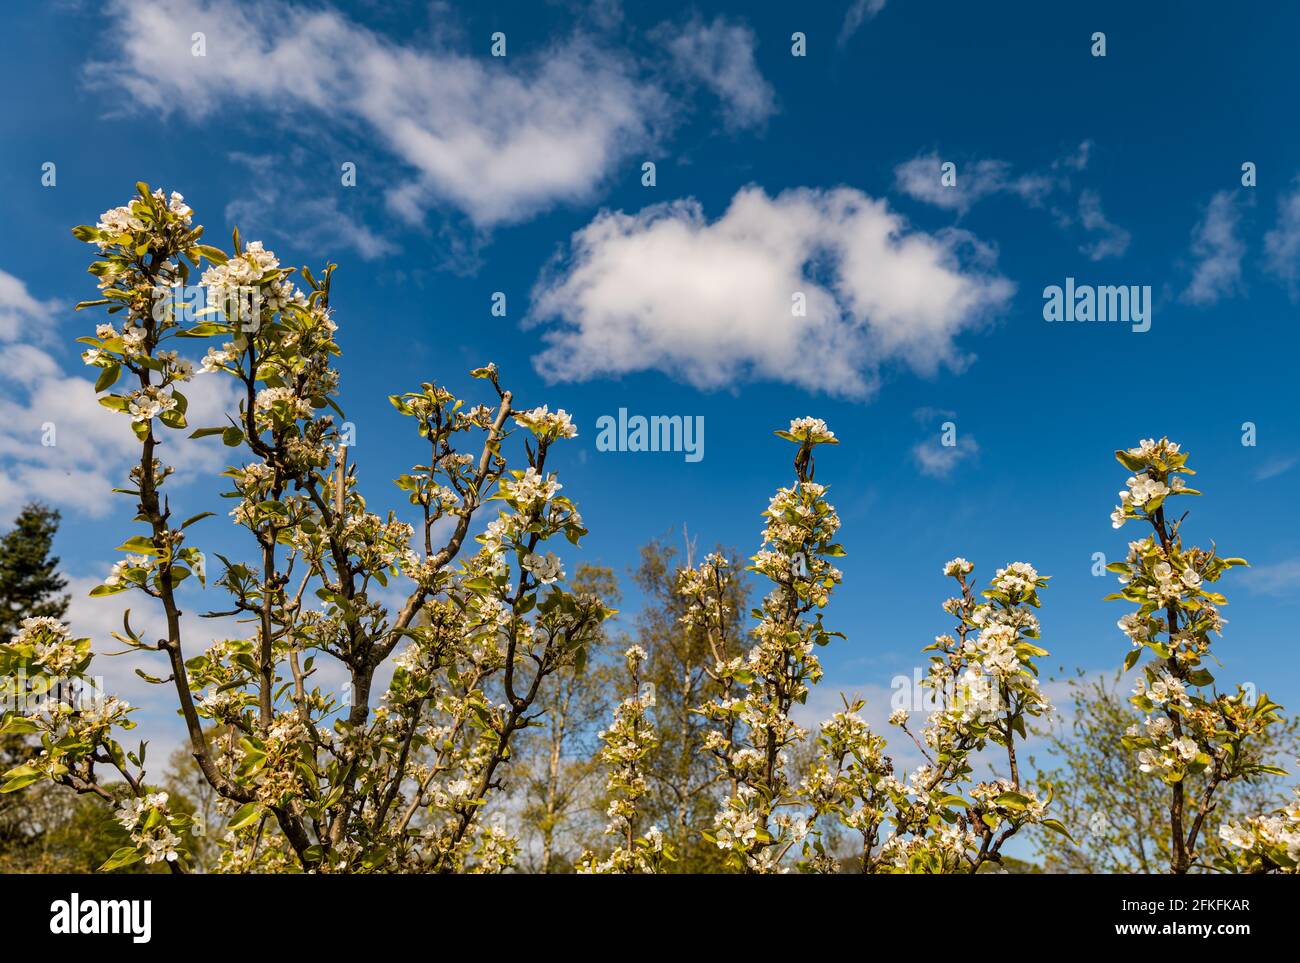 Apple tree blossom on sunny day with blue sky and puffy clouds, Scotland, UK Stock Photo